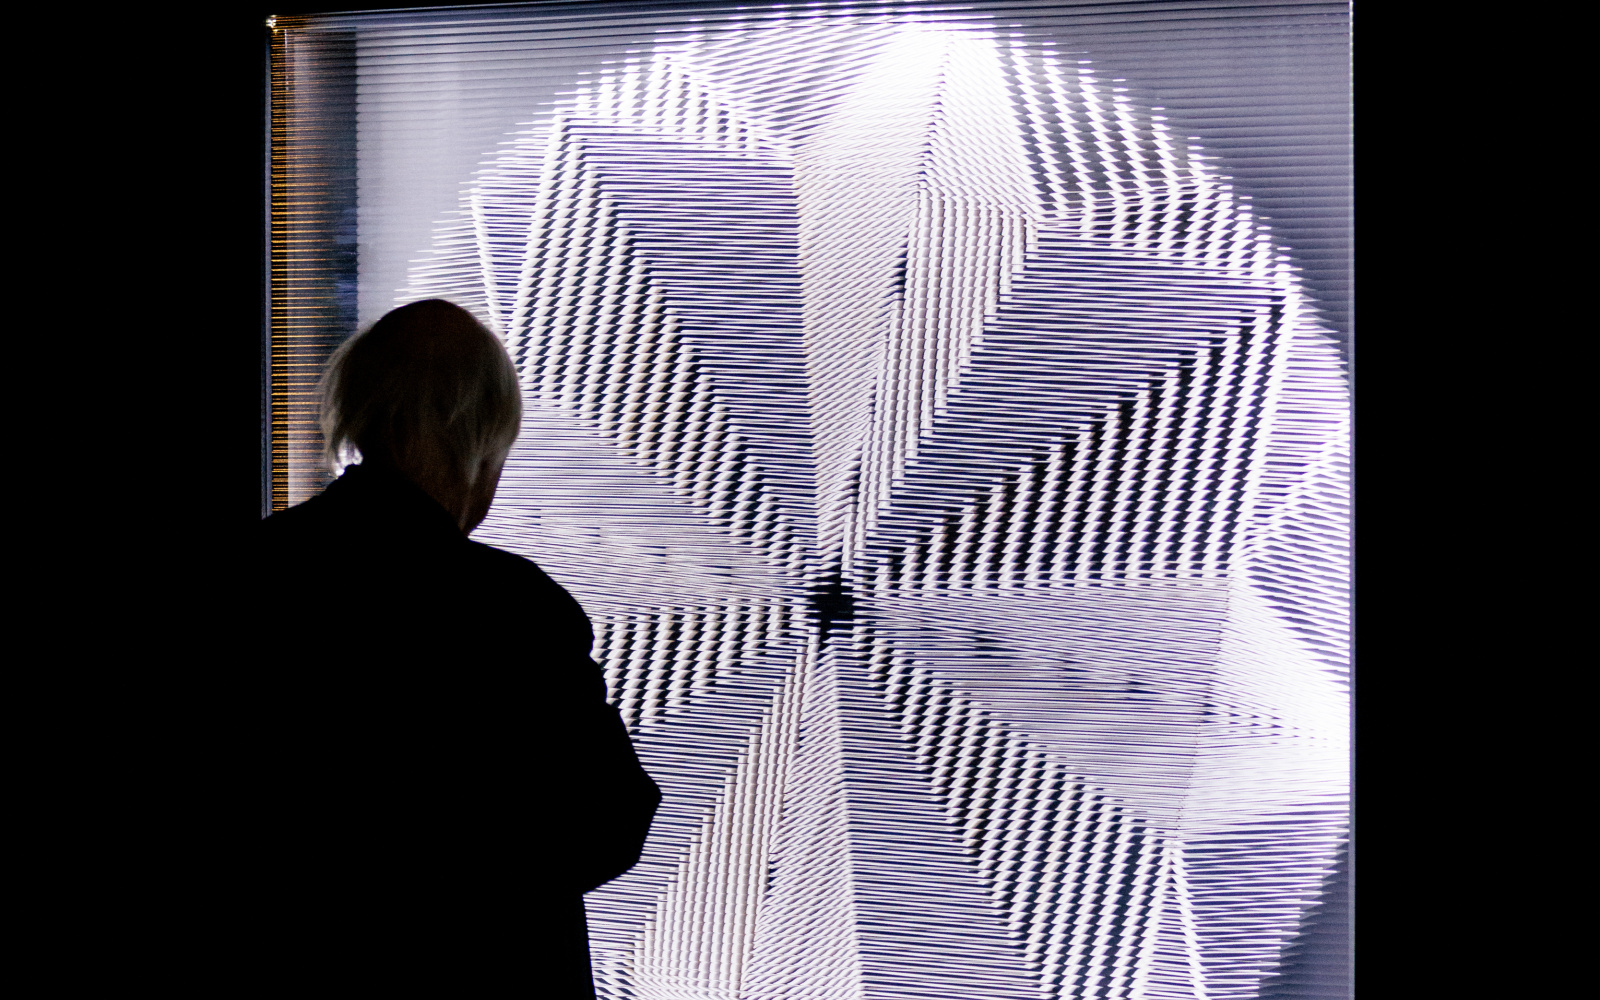 An elderly man stands in front of a round luminous disc, which creates a pattern because the glass in front of it is cut, and looks at it.